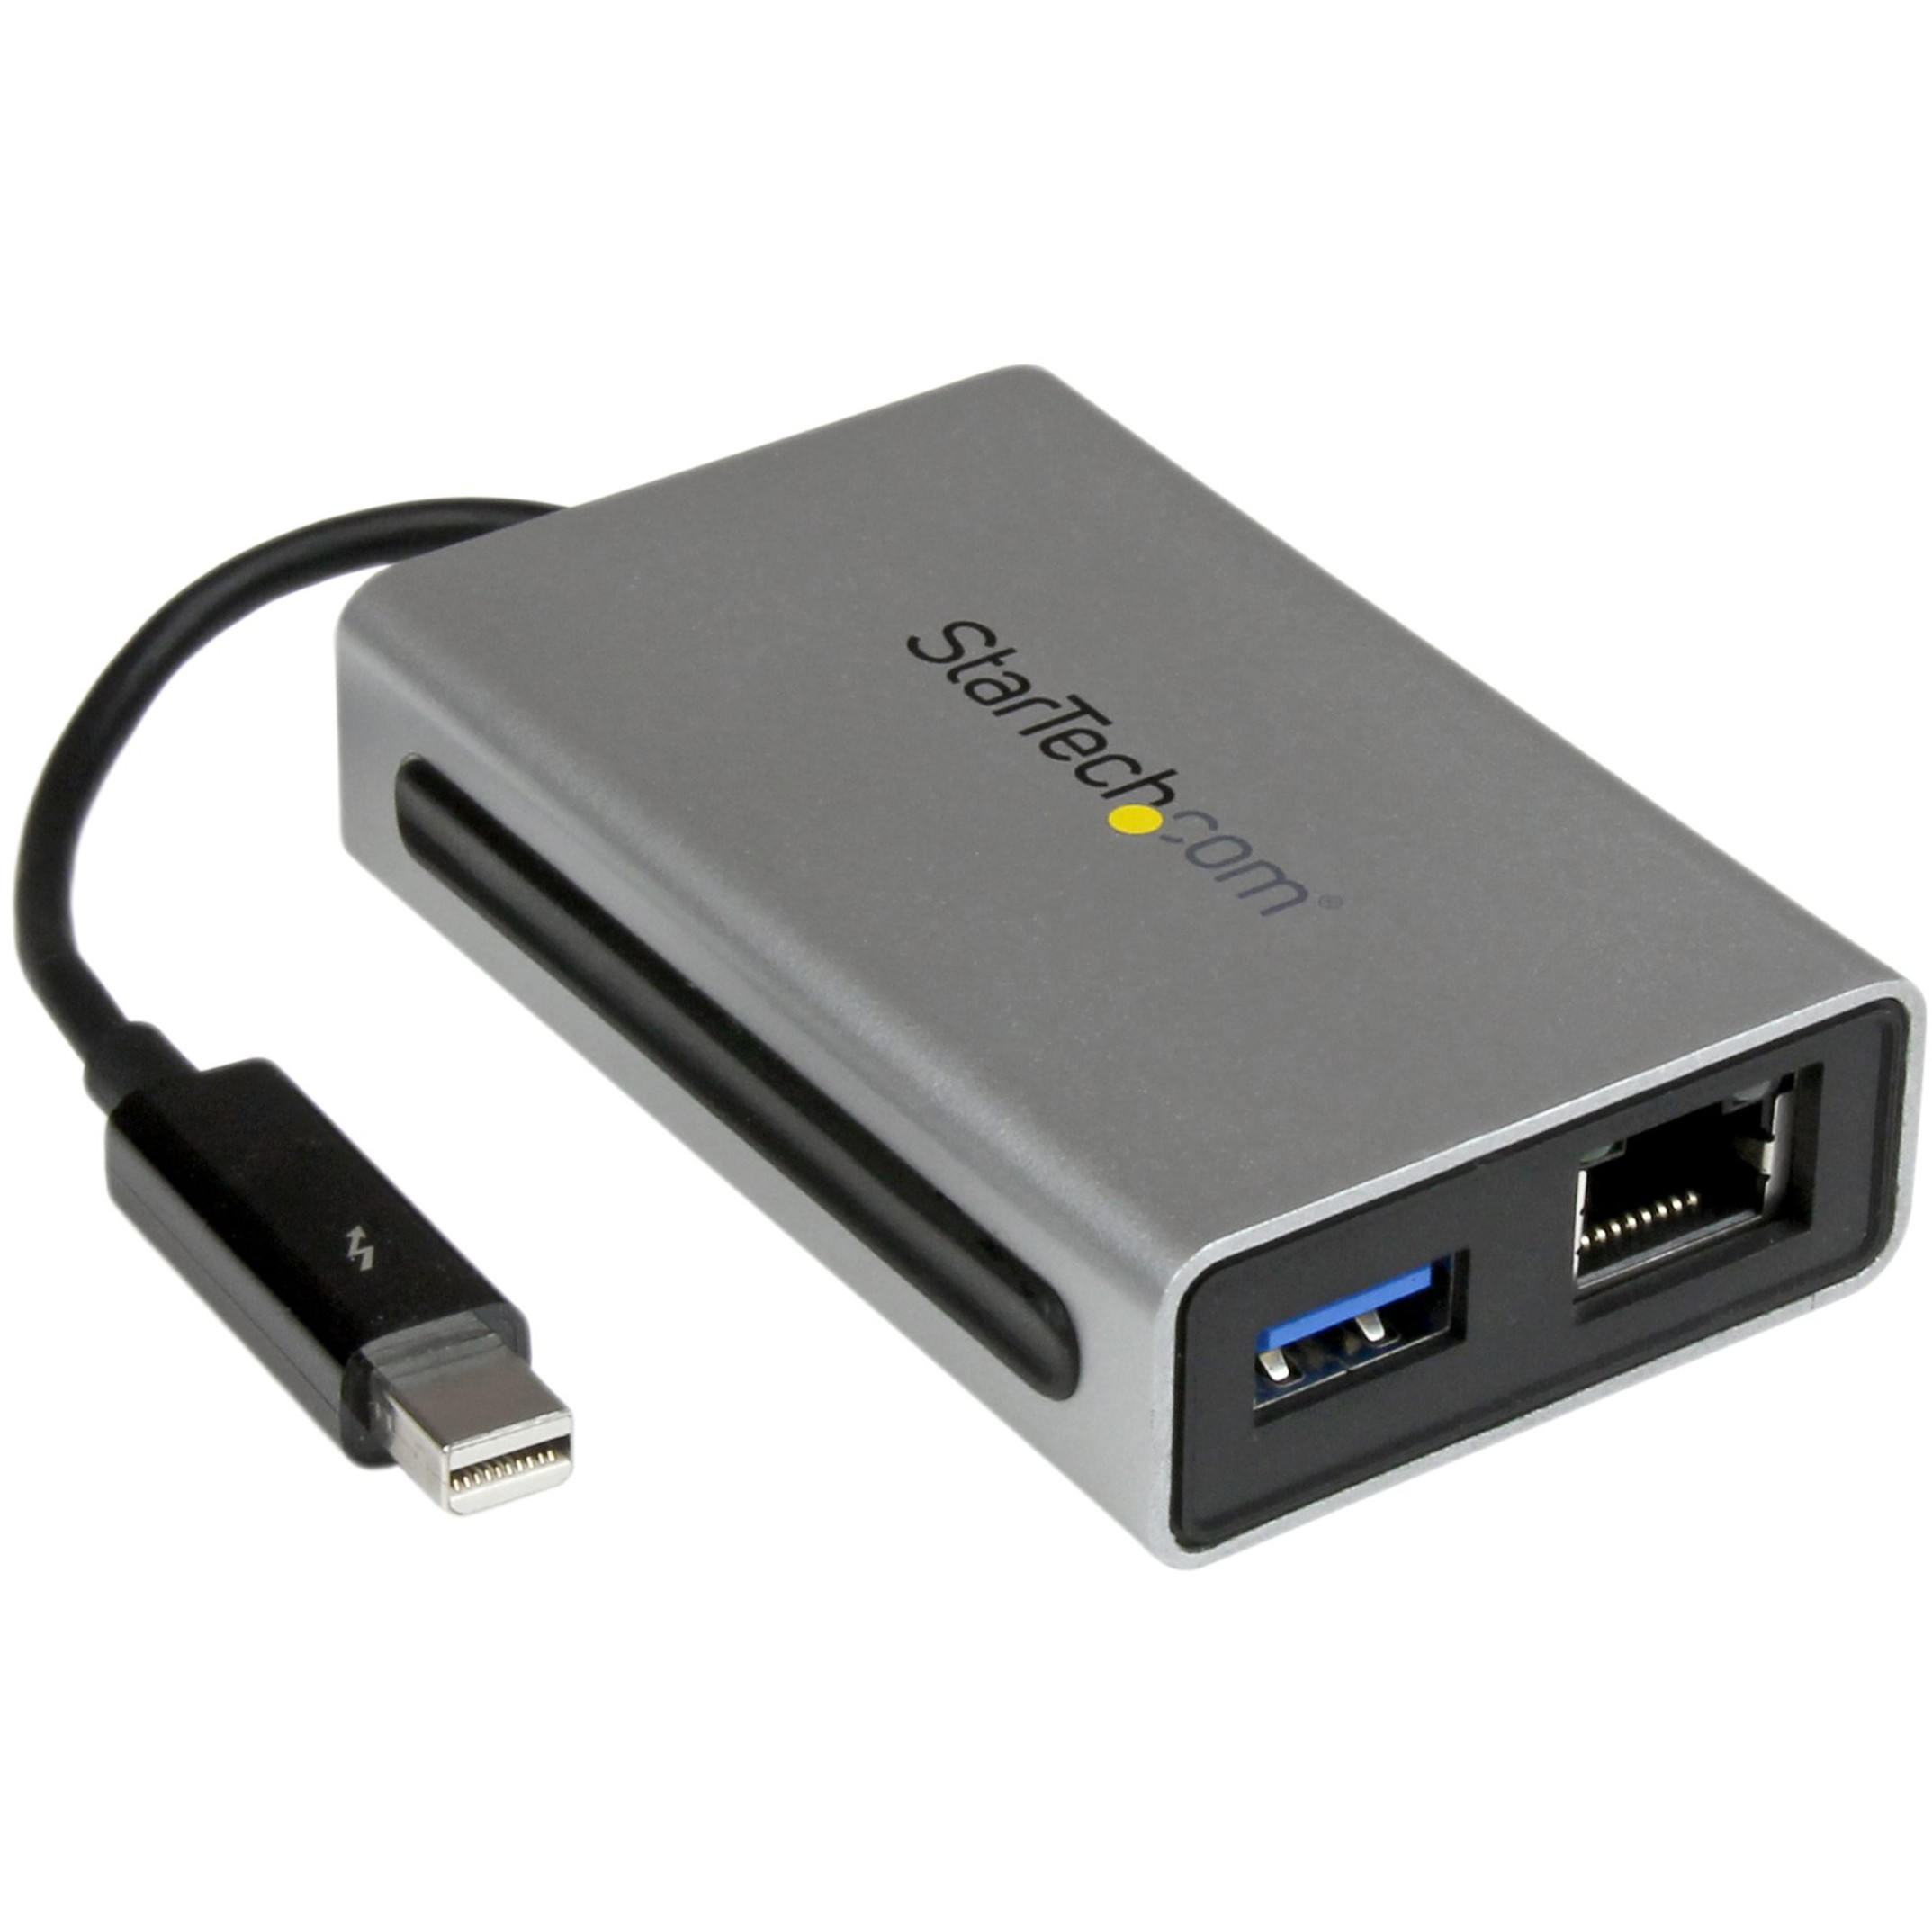 Startech .com Thunderbolt to Gigabit Ethernet plus USB 3.0Thunderbolt AdapterAdd a Gigabit Ethernet port and a USB 3.0 hub port to your T… TB2USB3GE